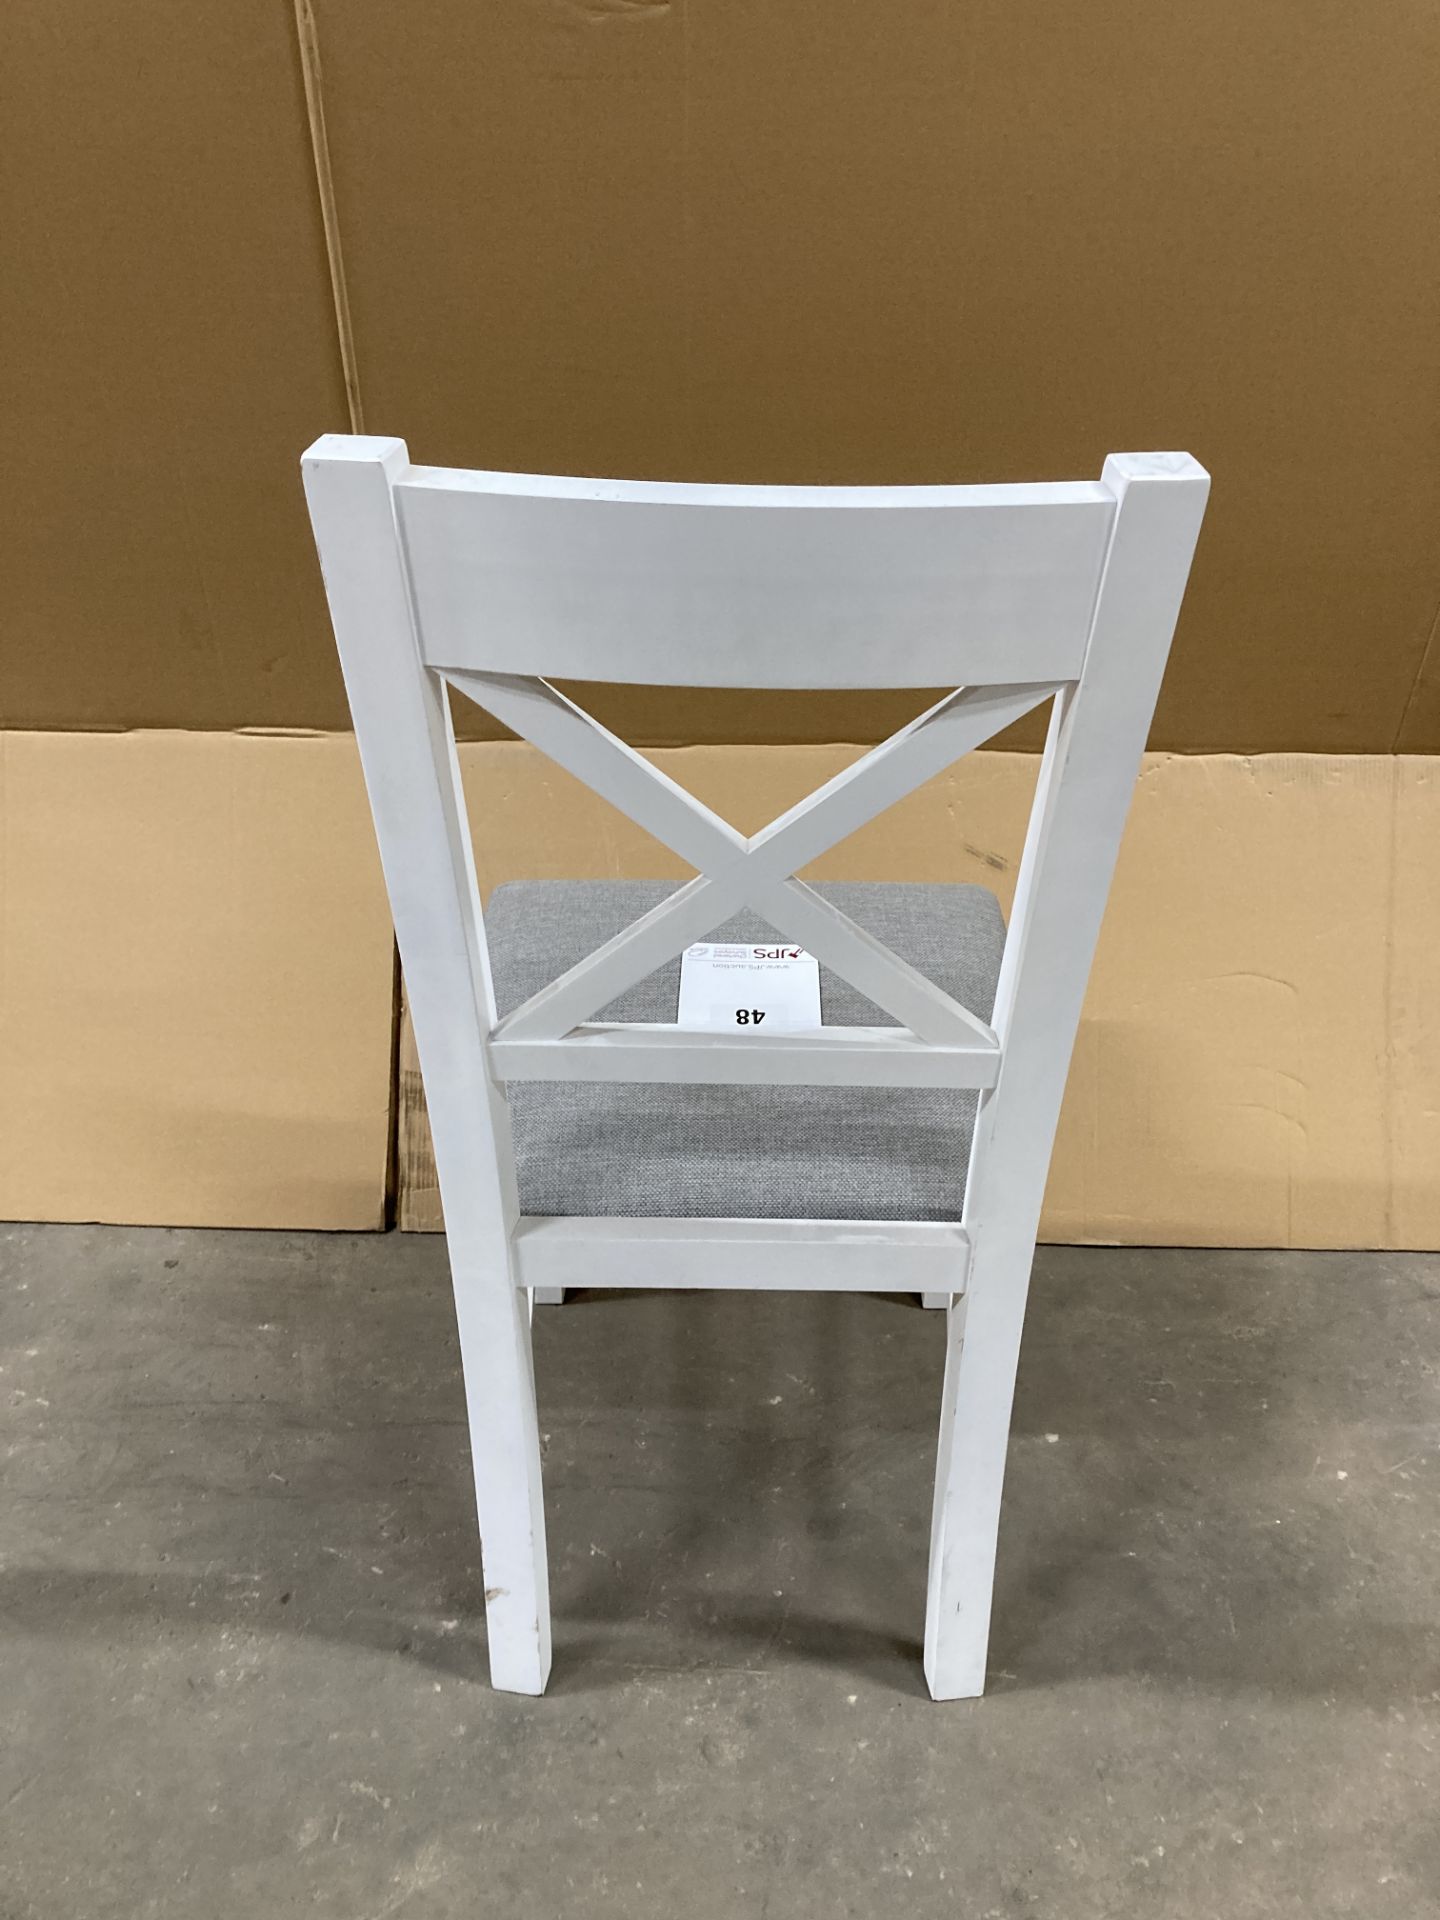 White Wooden Chair W/ Grey Fabric Seat Cushion - Image 3 of 3